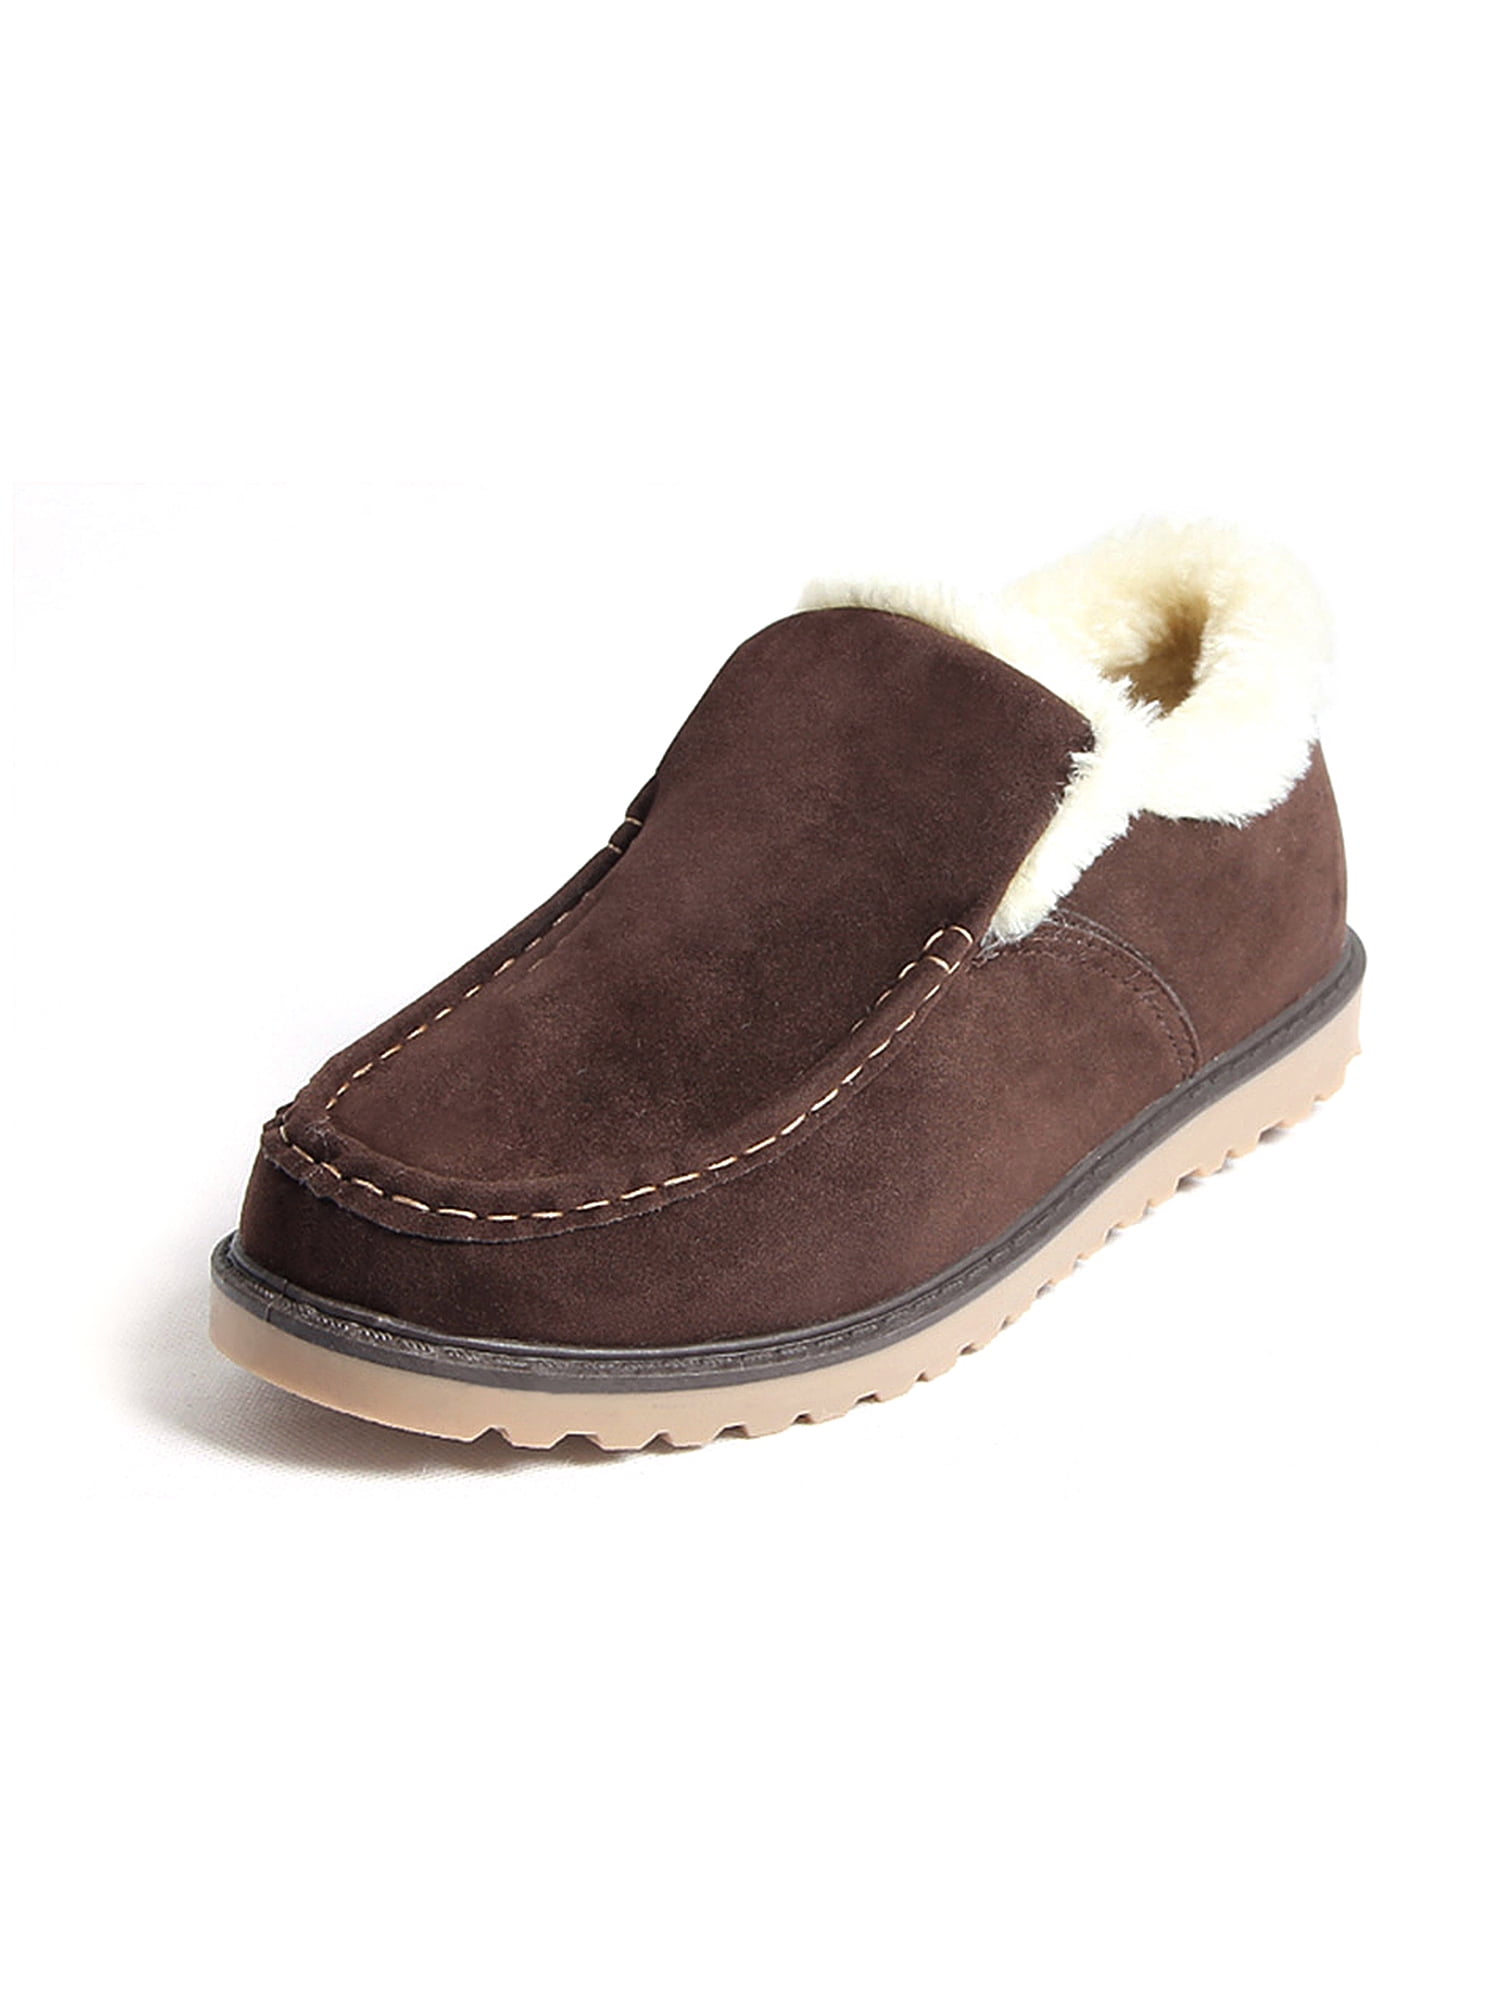 mens fur lined loafers